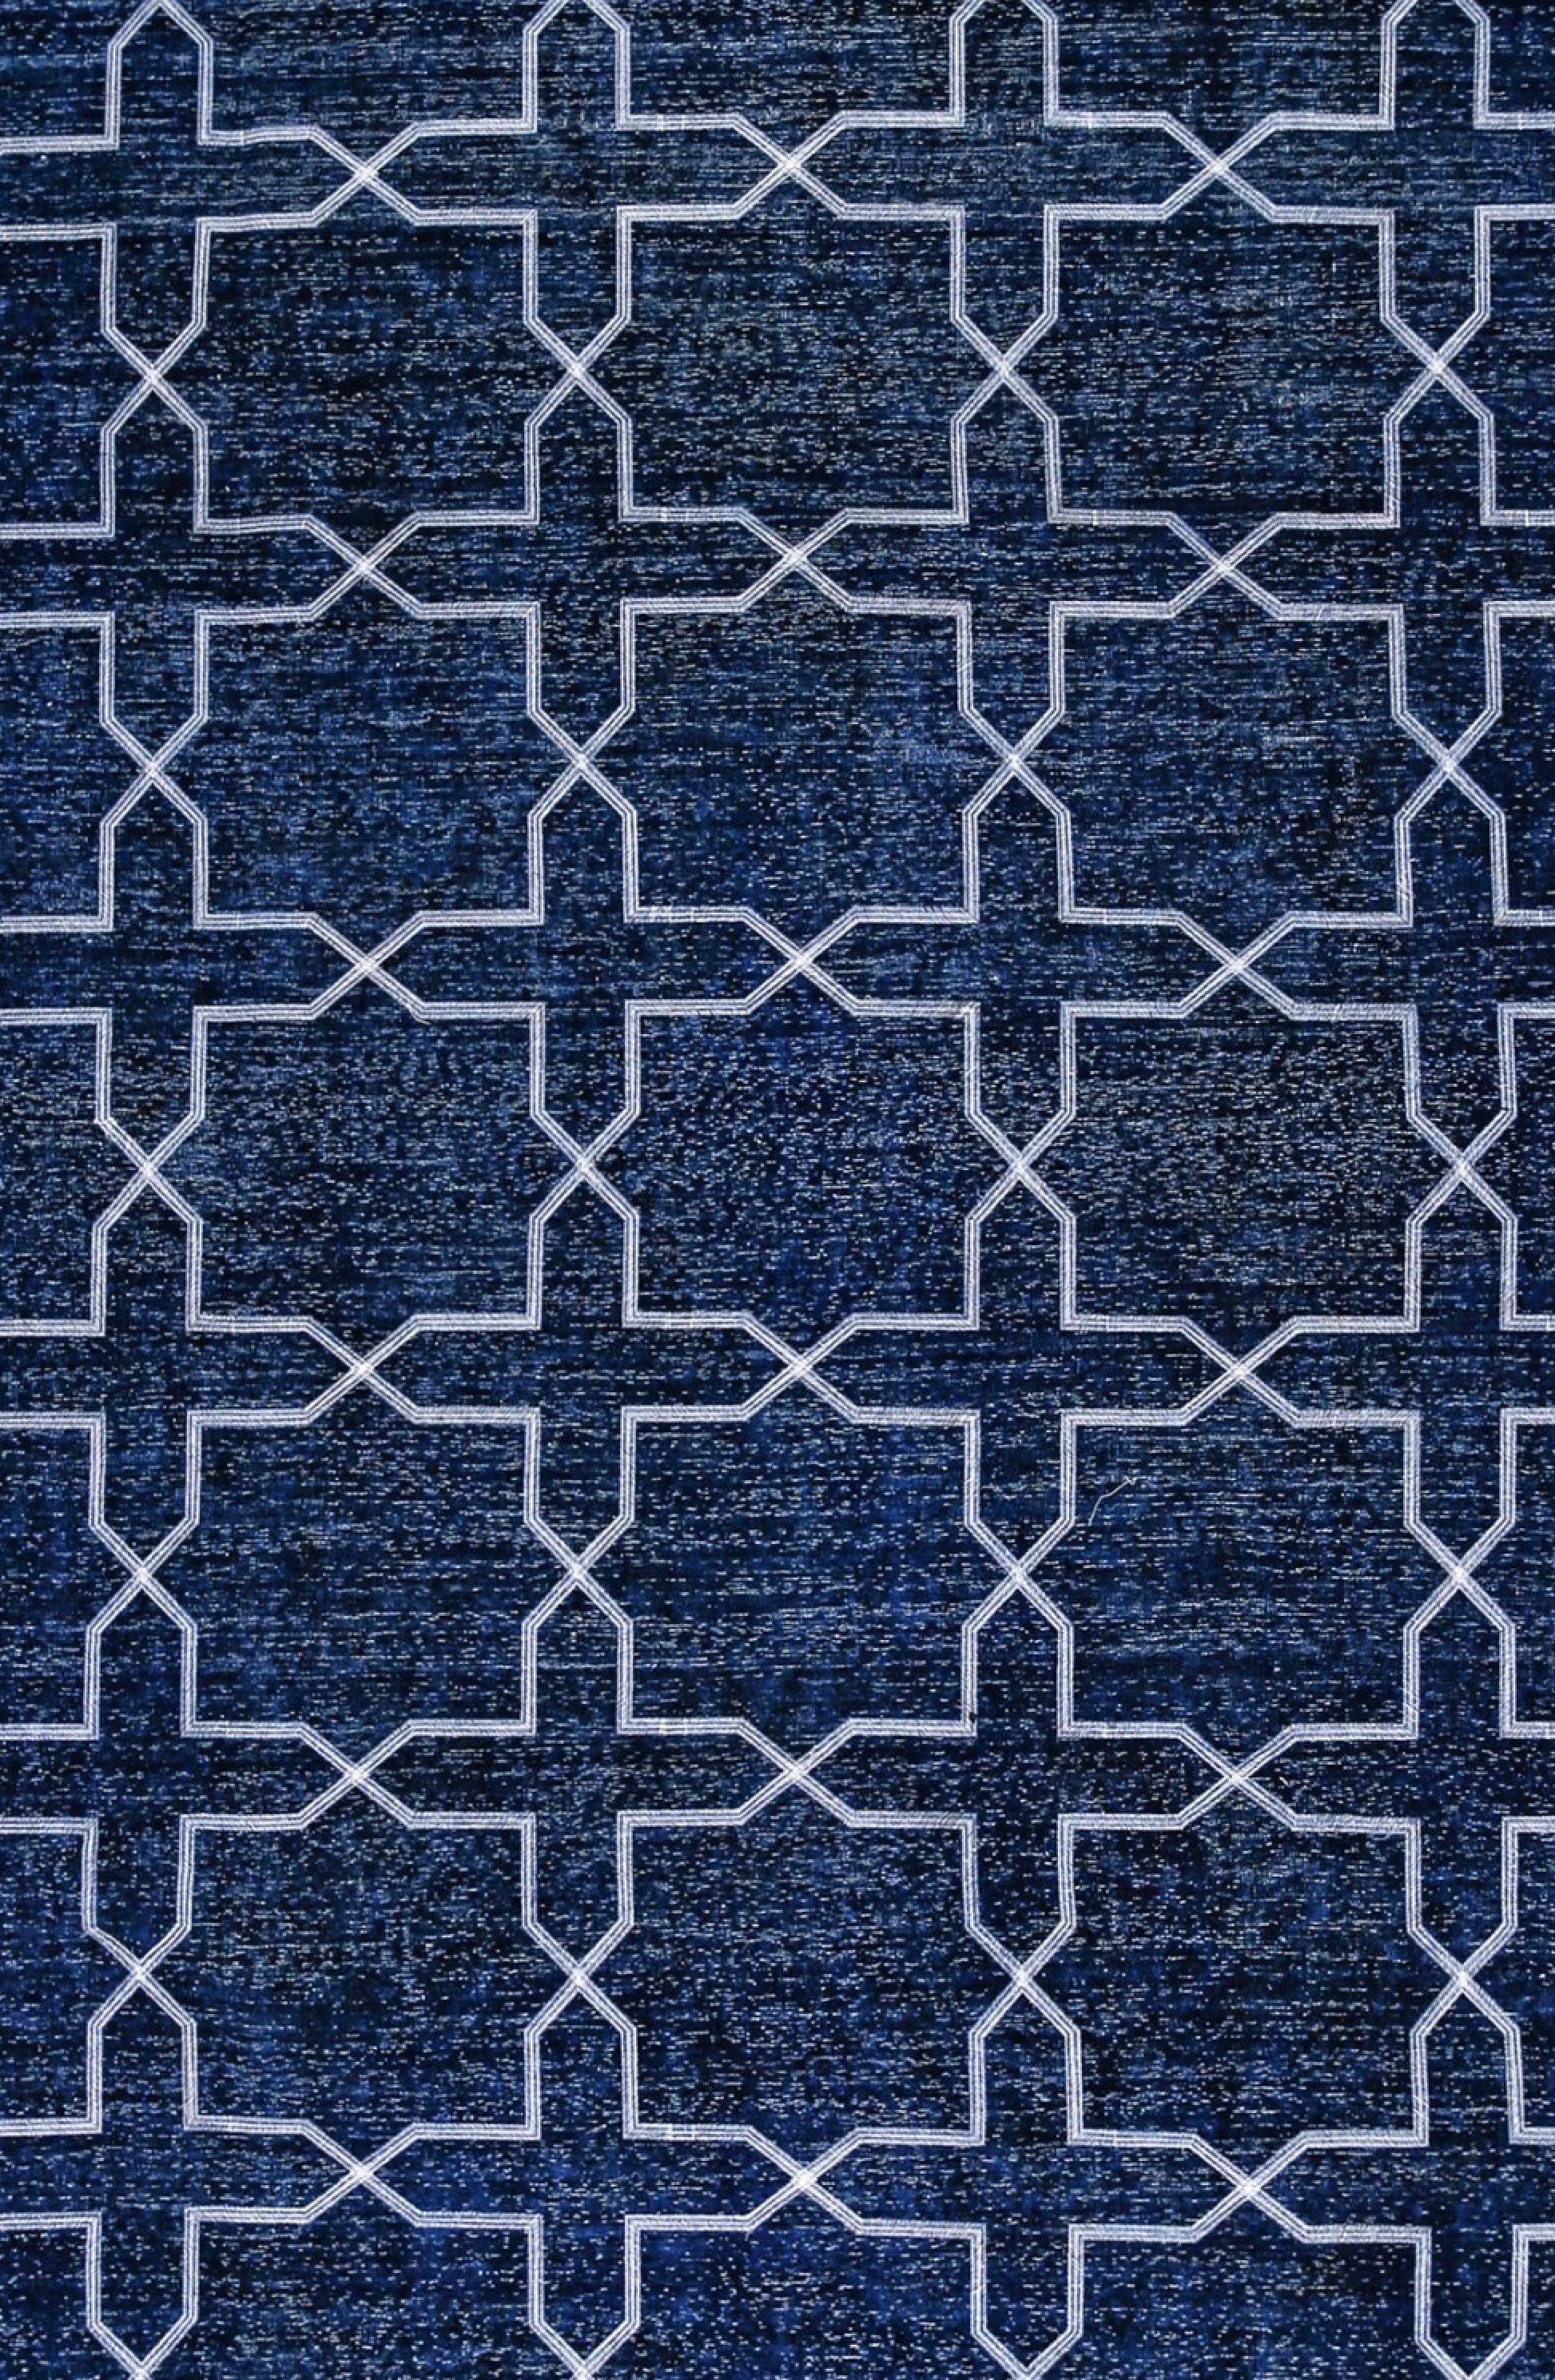 This is a fine example of an Overdyed area rug. These rugs demonstrate a process best described as 'The modern palette applied to classics'. It consists of an added step to the finishing process in which the rug is antique washed, sheared, and